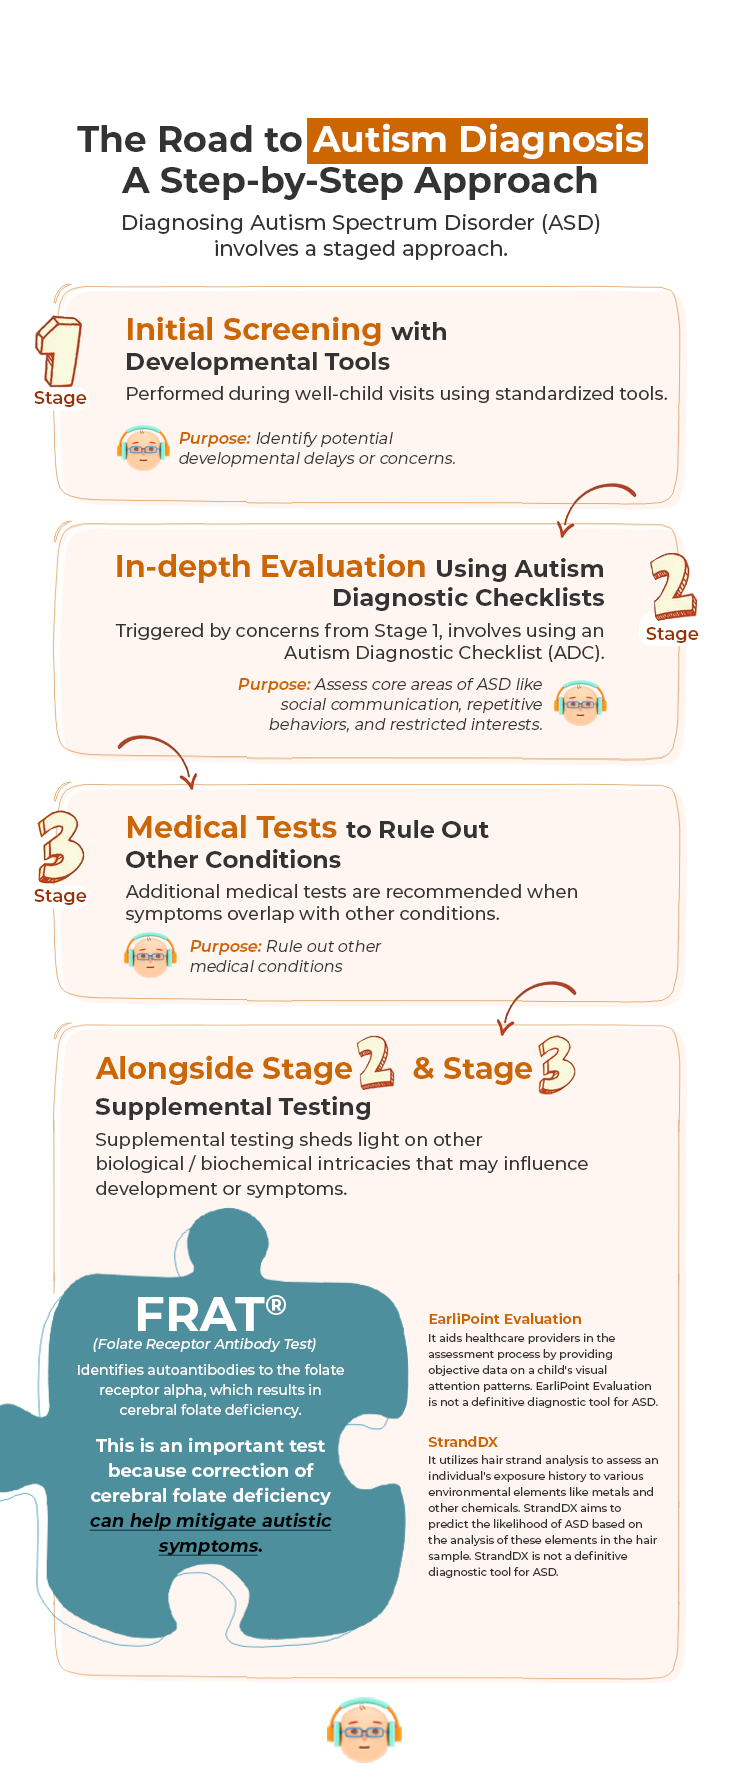 What is the step-by-step approach to diagnosing Autism Spectrum Disorder (ASD)?